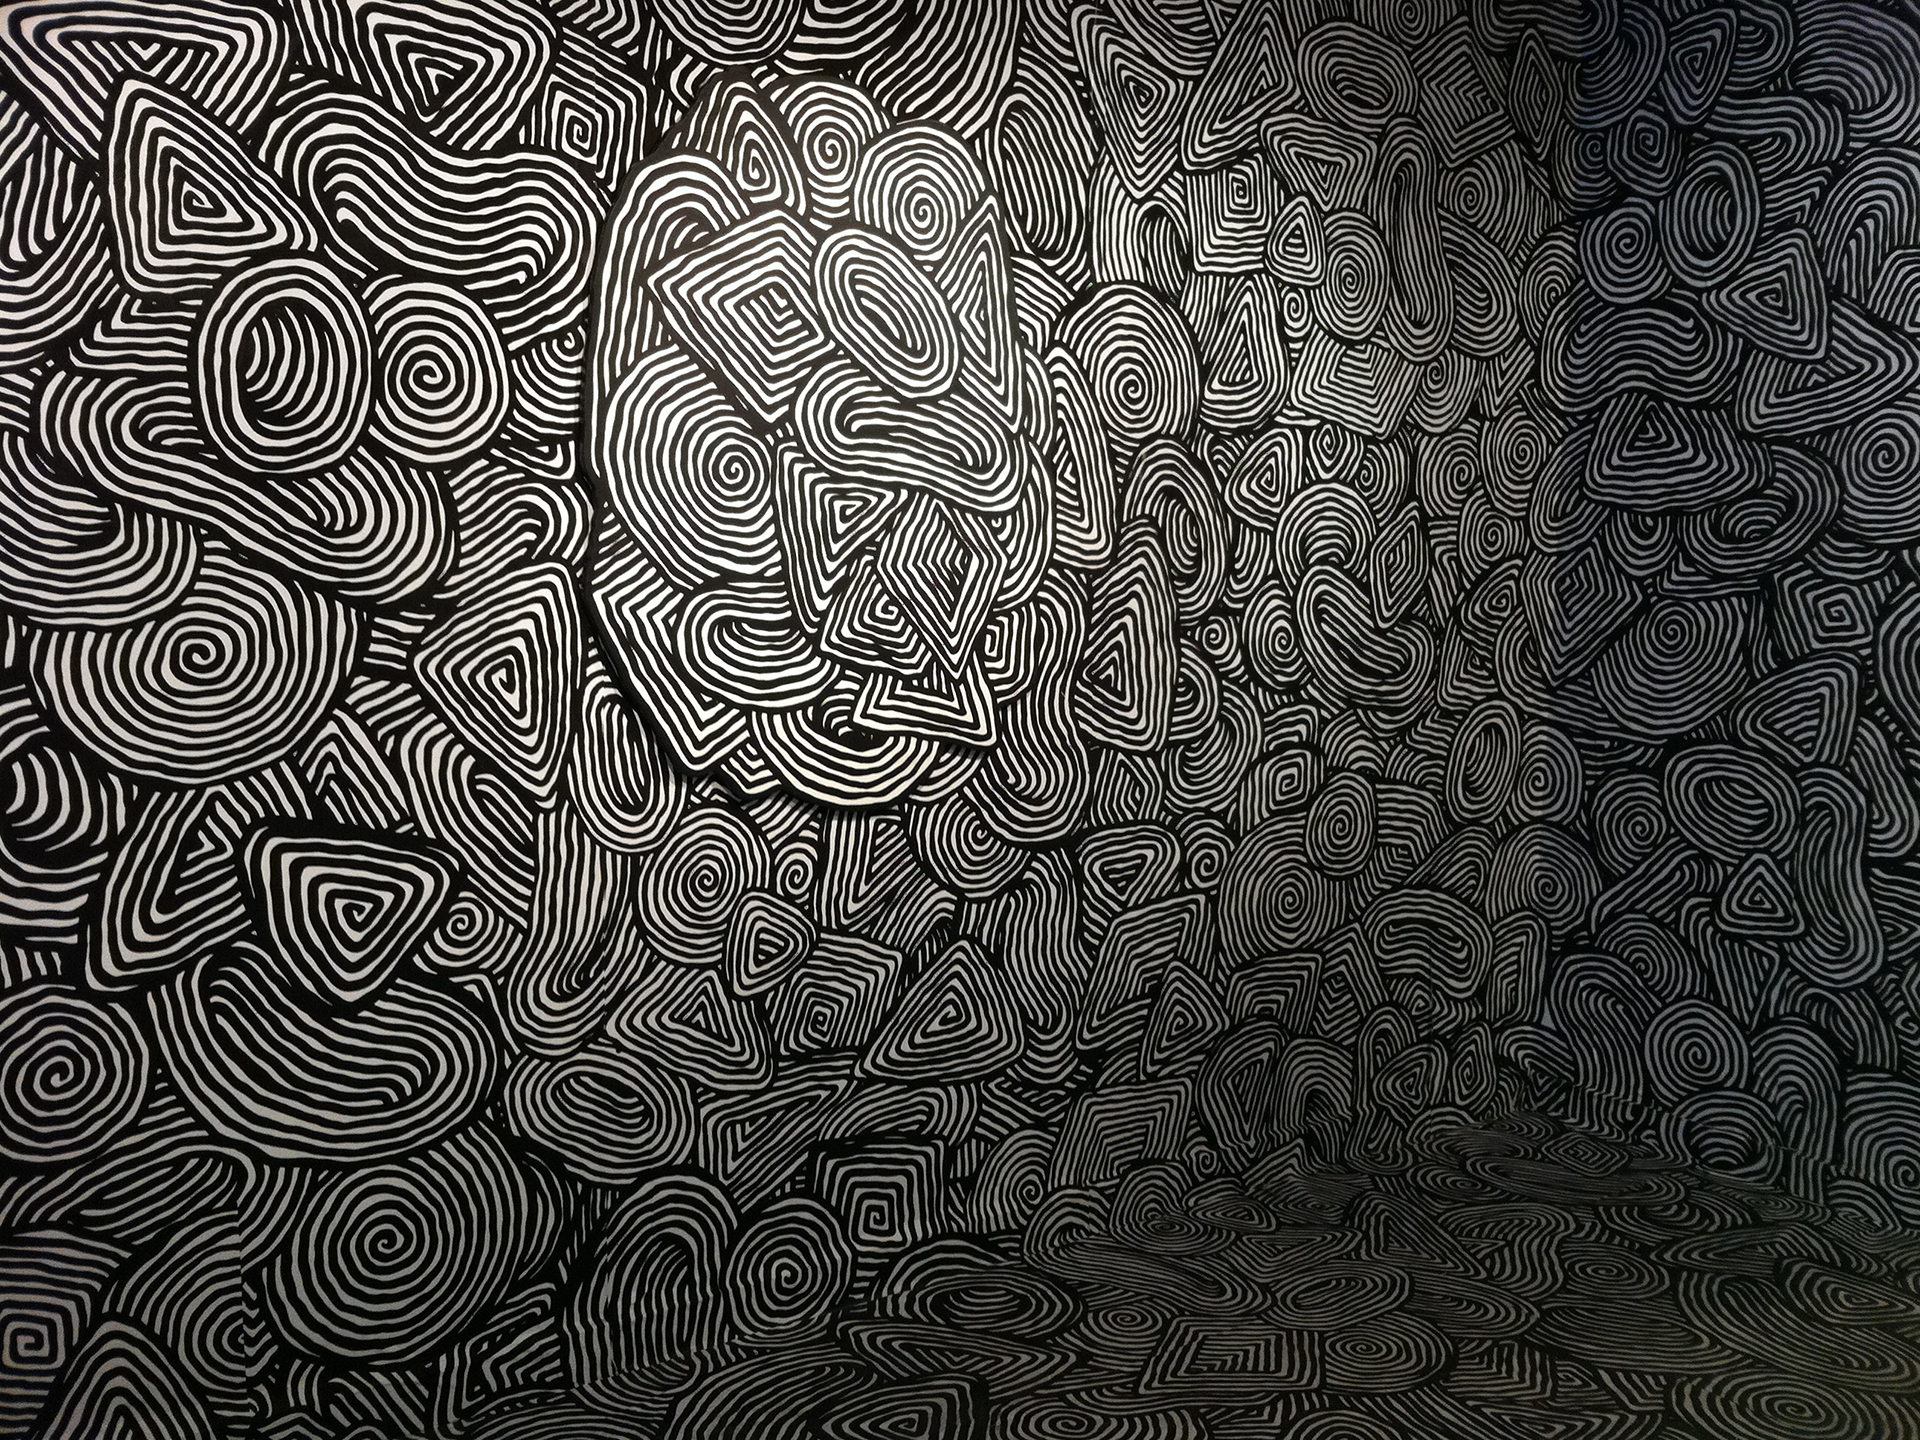 mind, Teaser, Psychedelic, Pattern, Texture, Spiral, Black, White, 3d Wallp...